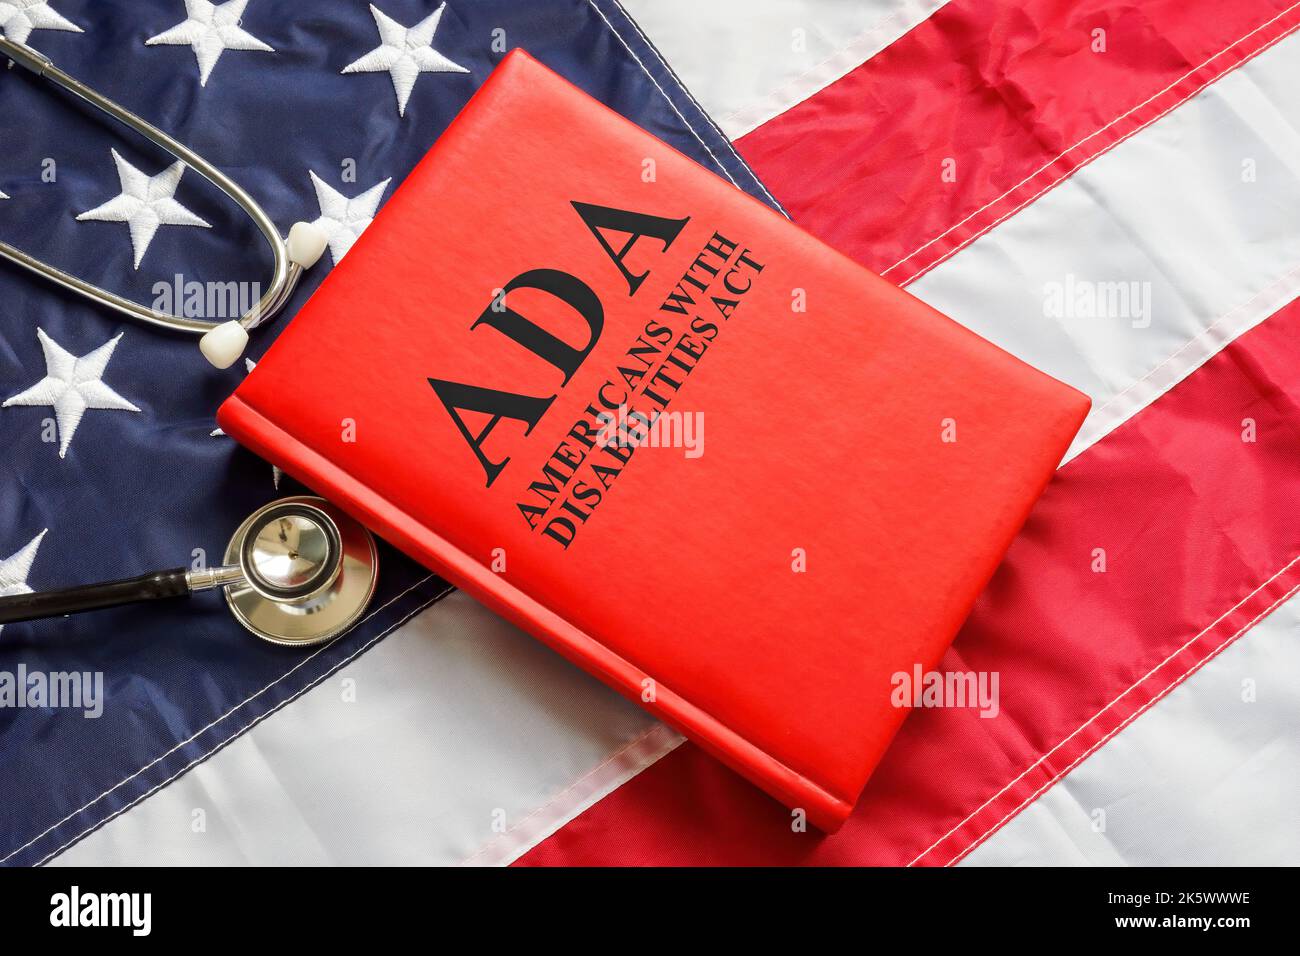 American flag, book The Americans with Disabilities Act ADA law and stethoscope. Stock Photo